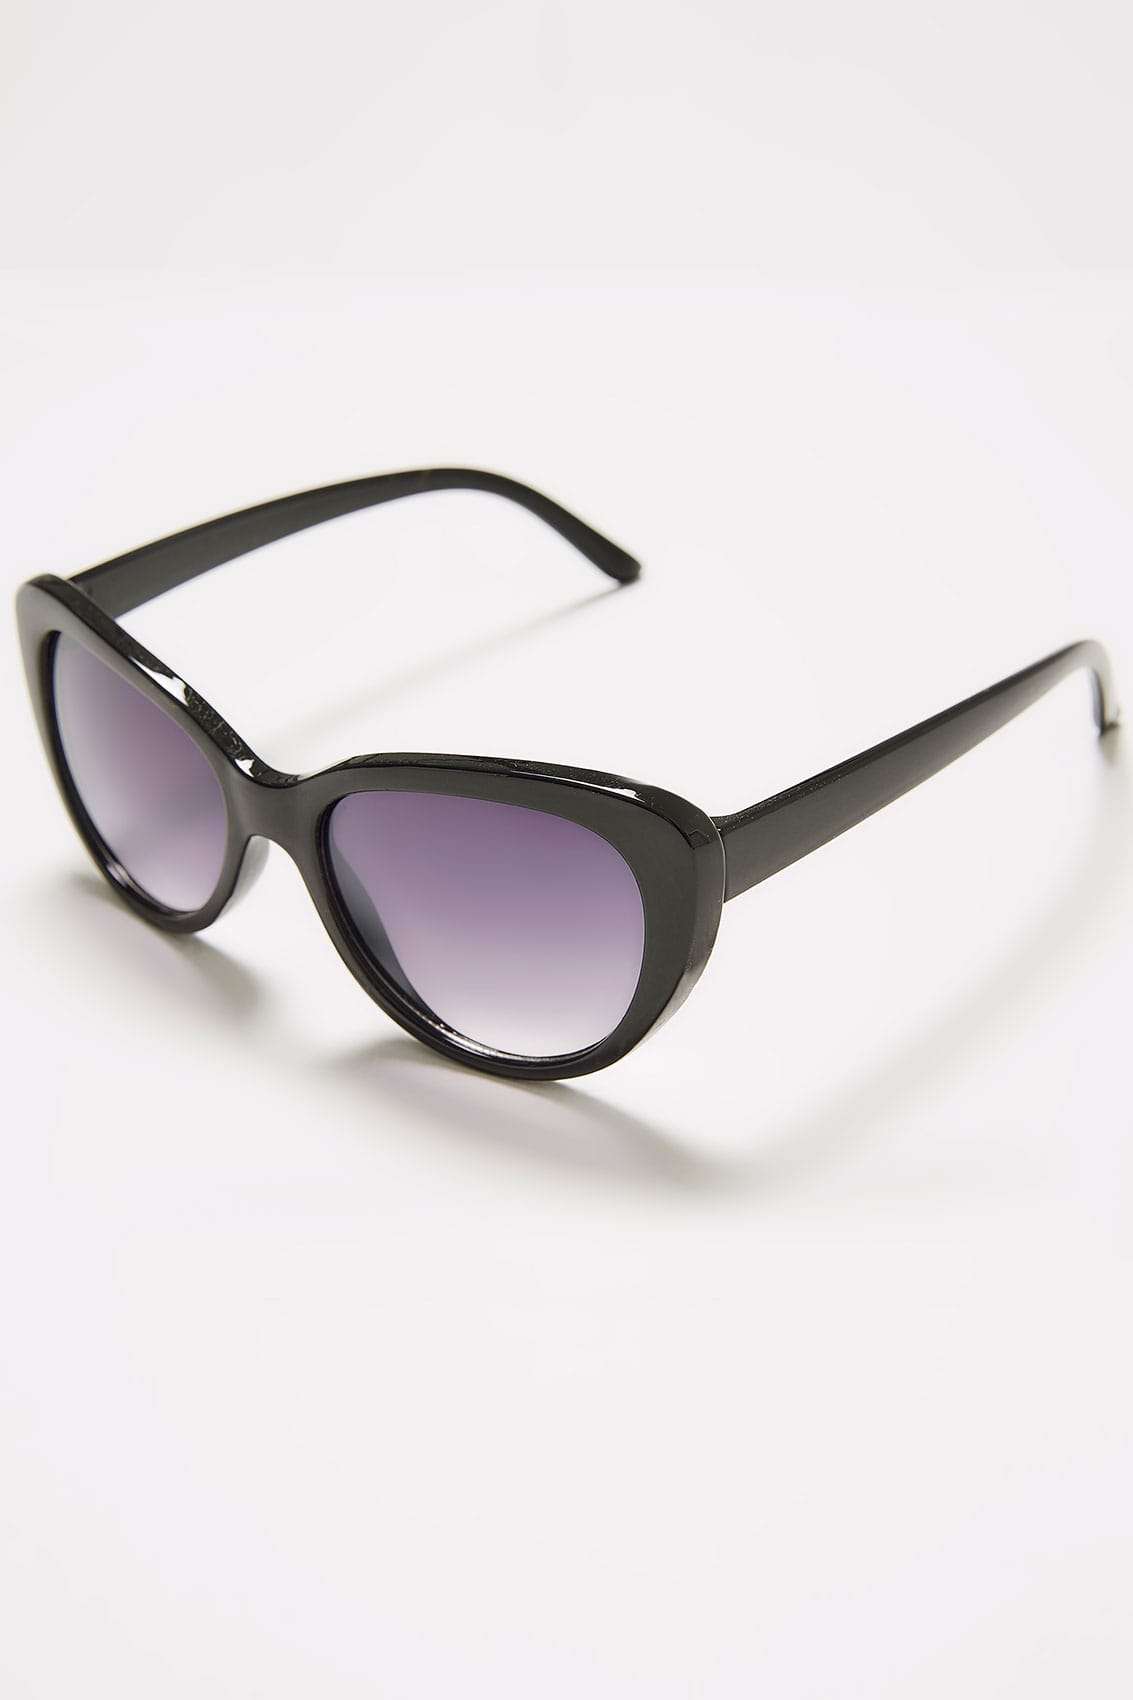 Black Cat Eye Sunglasses With UV Protection